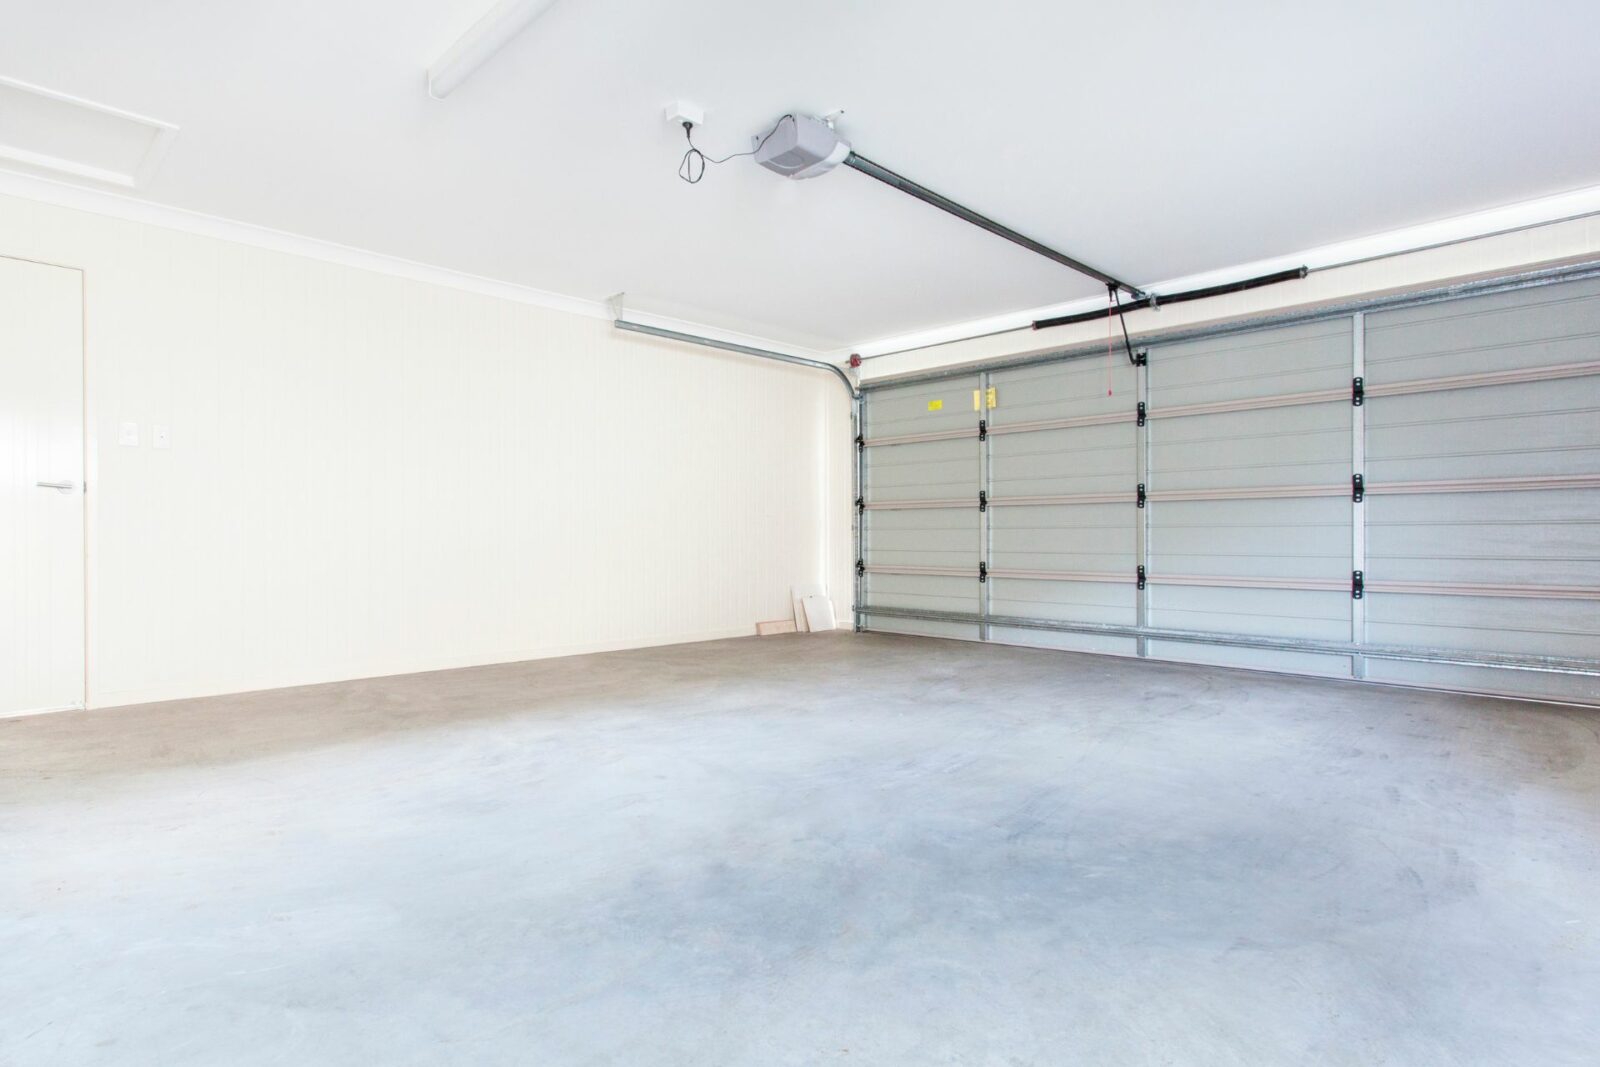 how to cool a garage with no windows